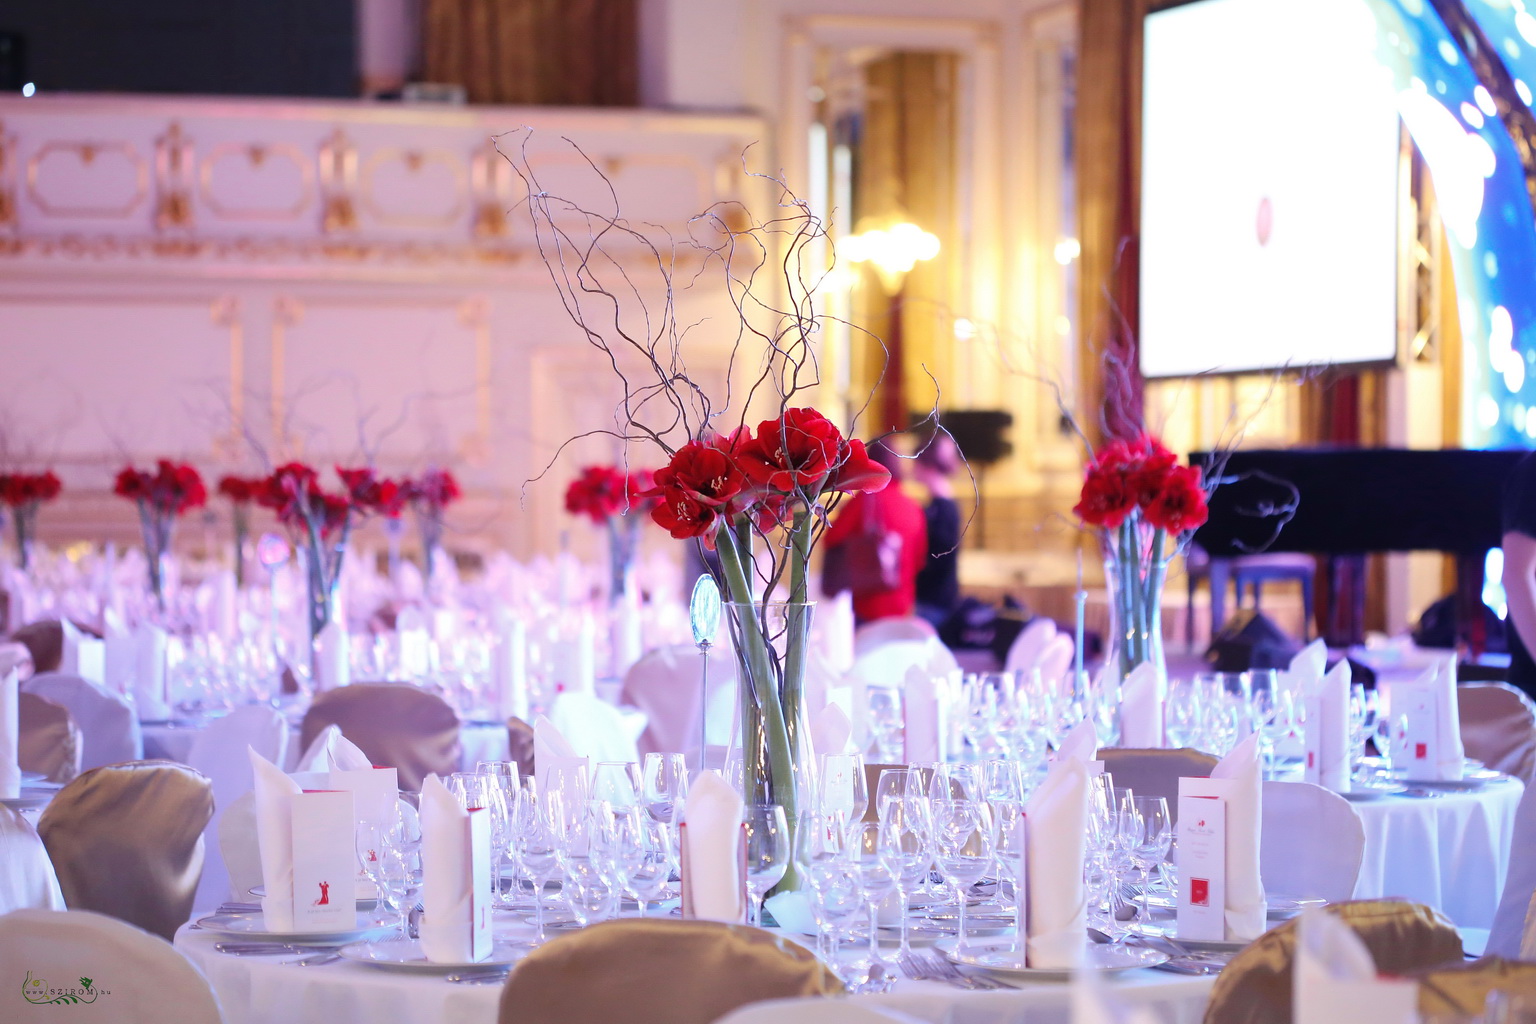 flower delivery Budapest - Event decor with red amaryllis (1pc), Corinthia Budapest